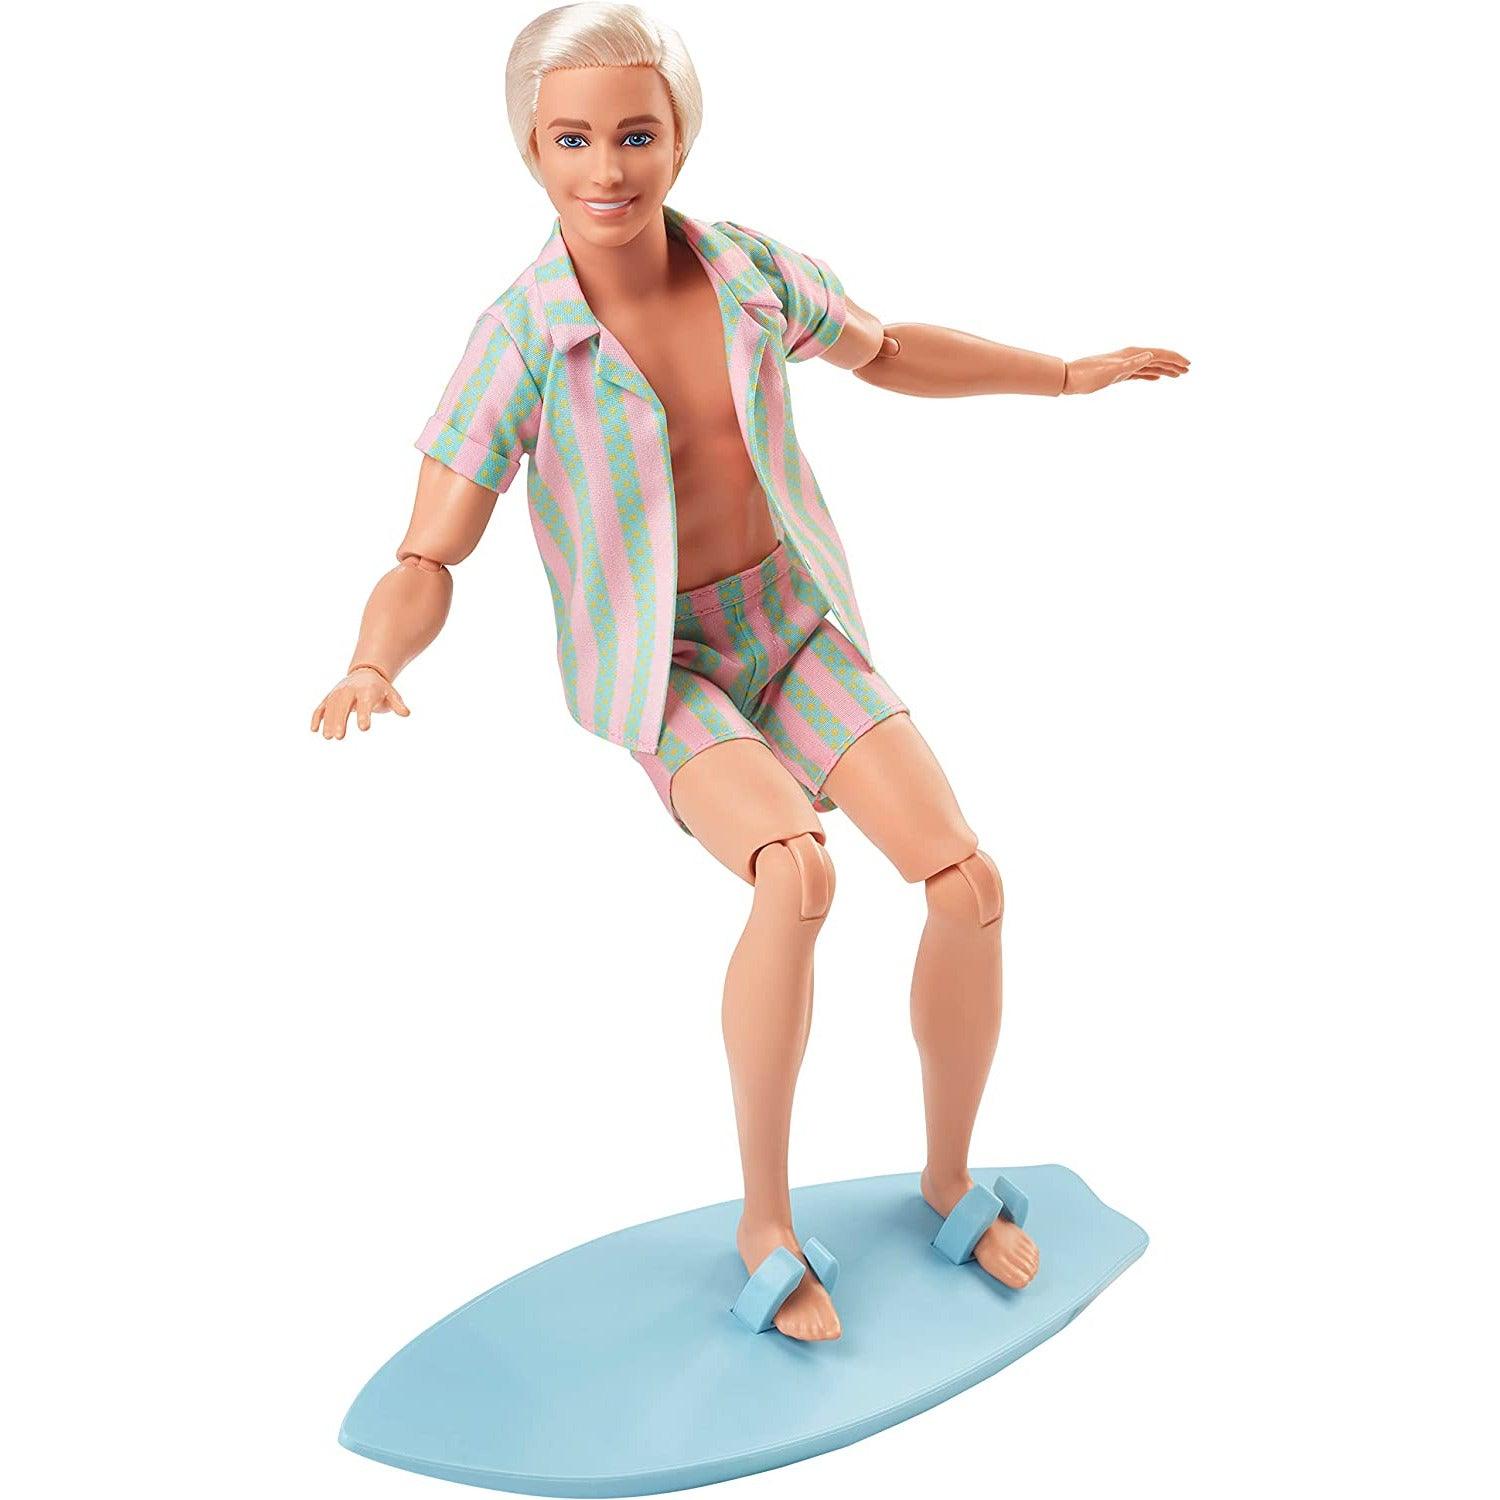 Barbie The Movie Ken Doll Wearing Pastel Pink and Green Striped Beach Matching Set with Surfboard and White Sneakers - BumbleToys - 5-7 Years, Barbie, Boys, Disney Princess, dup-review-publication, Fashion Dolls & Accessories, Girls, Mattel, Pre-Order